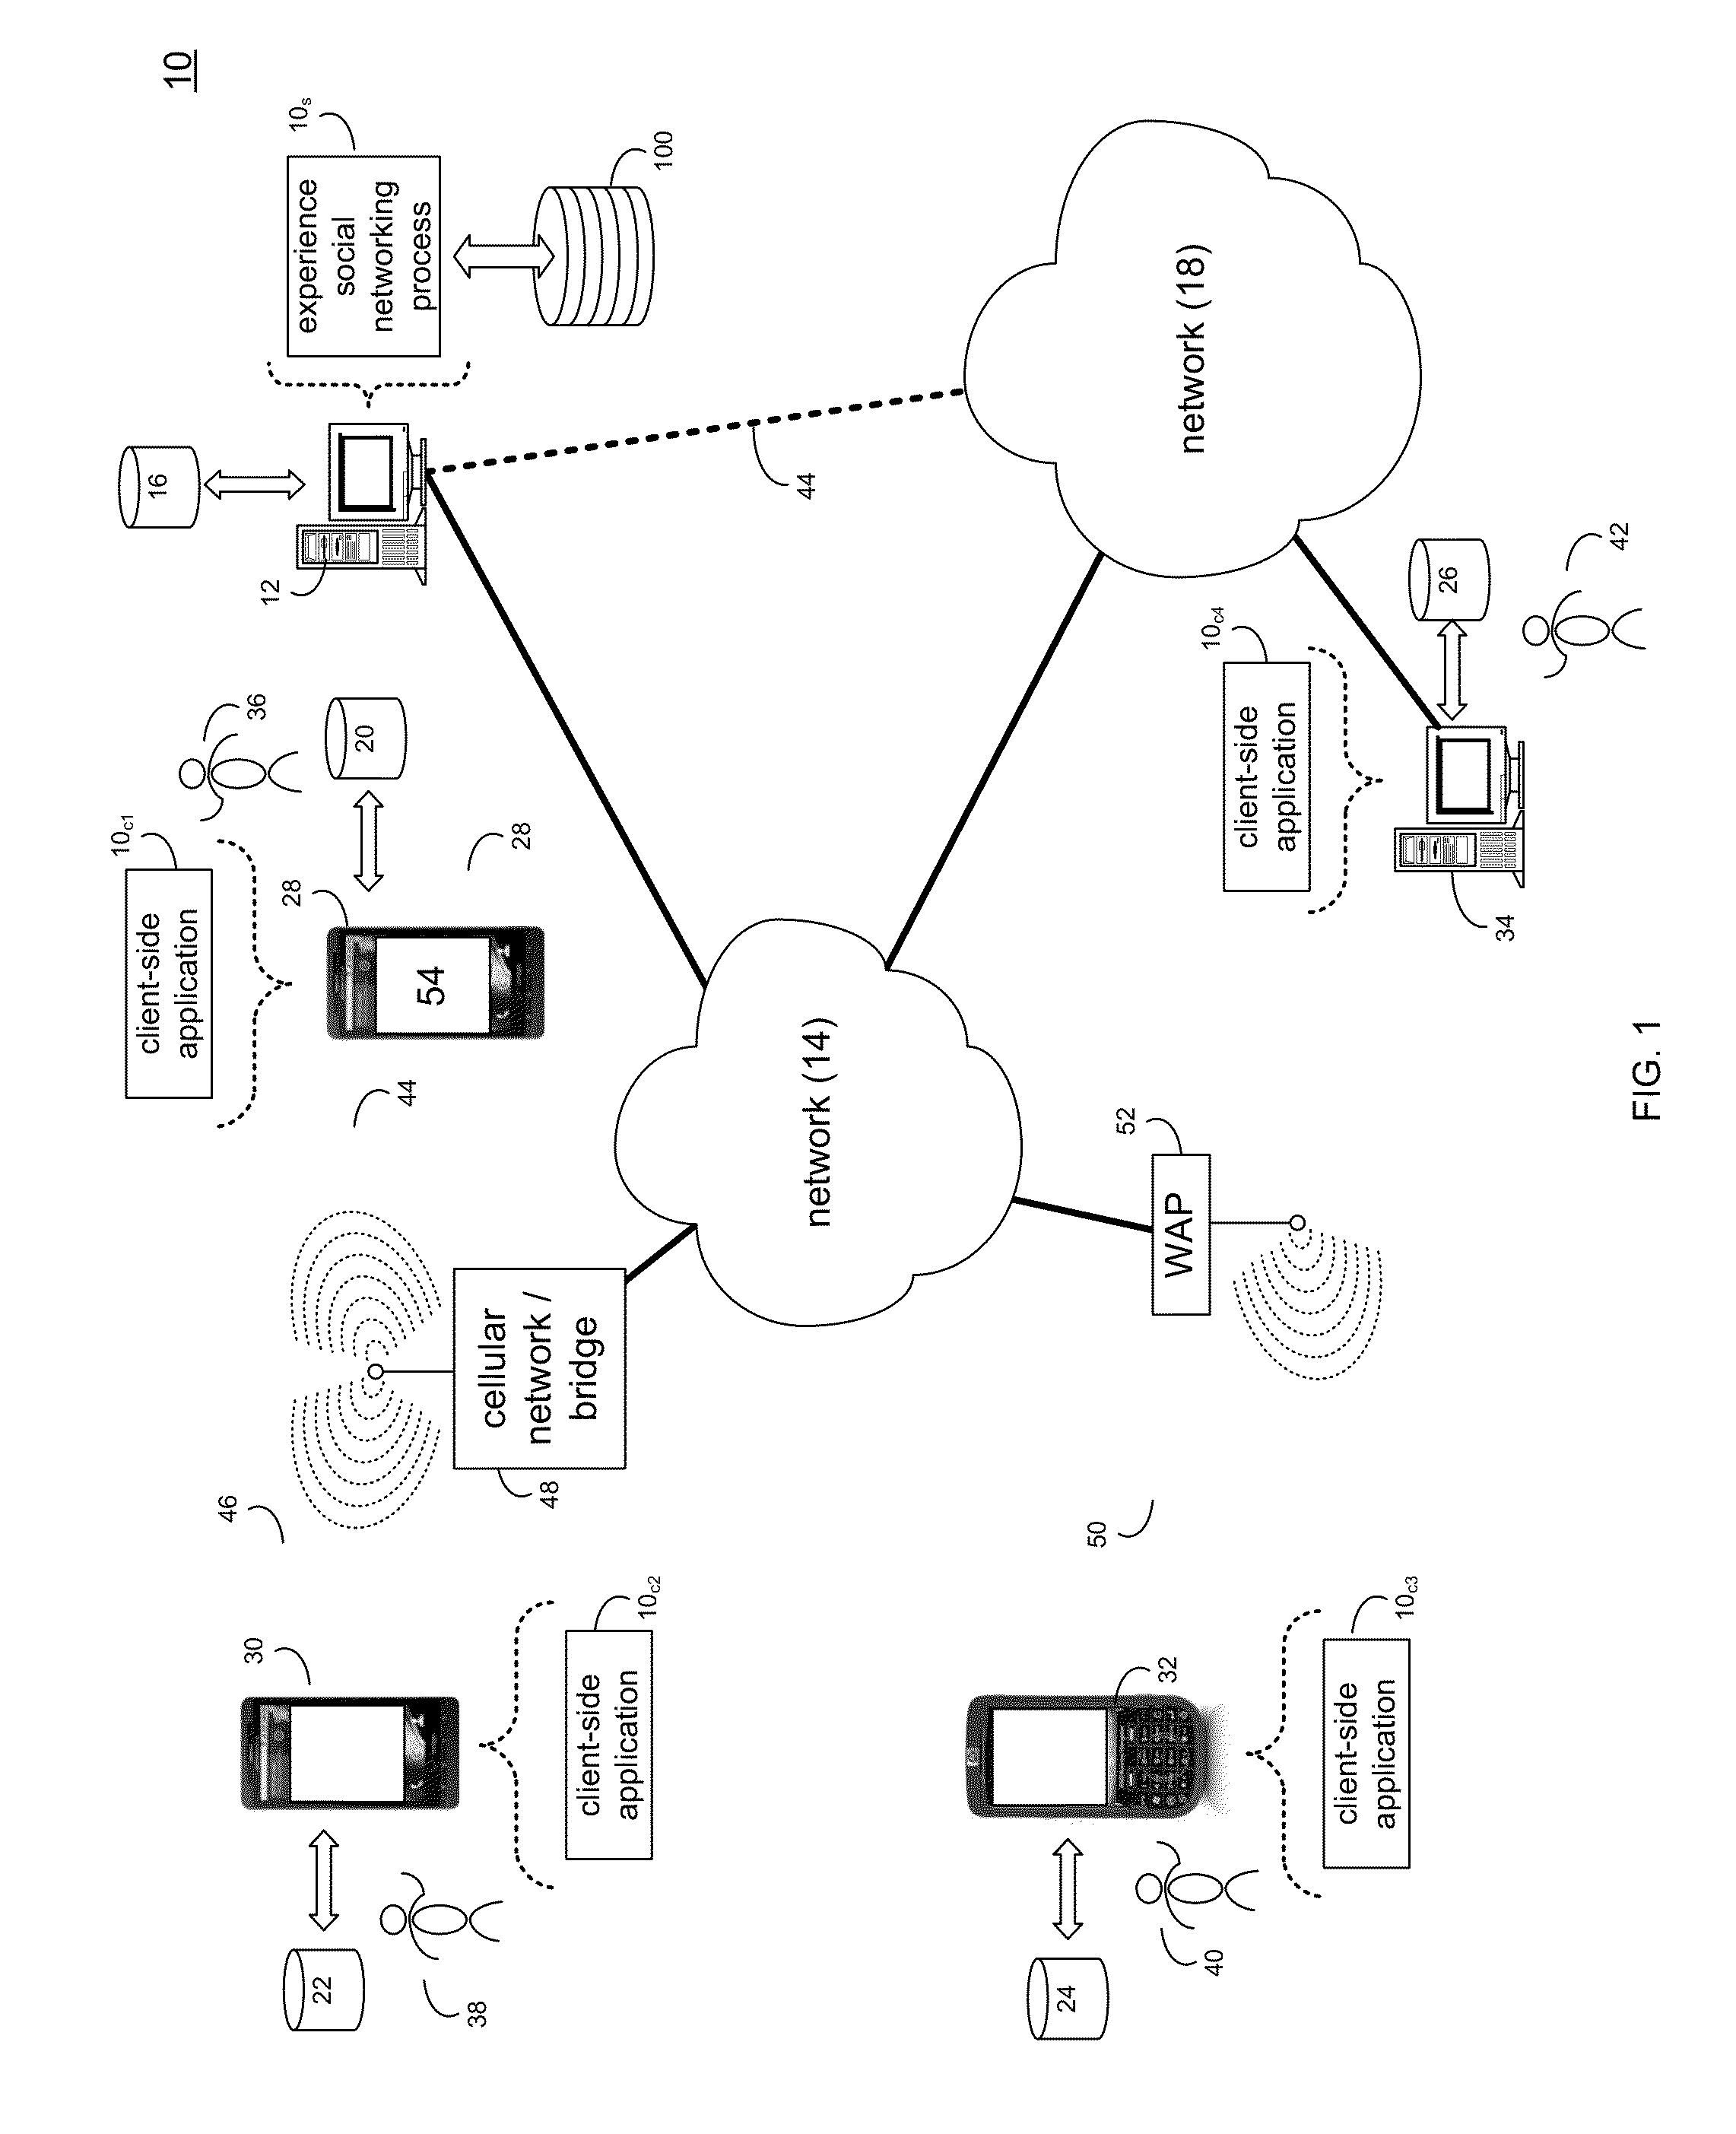 Experience sharing system and method